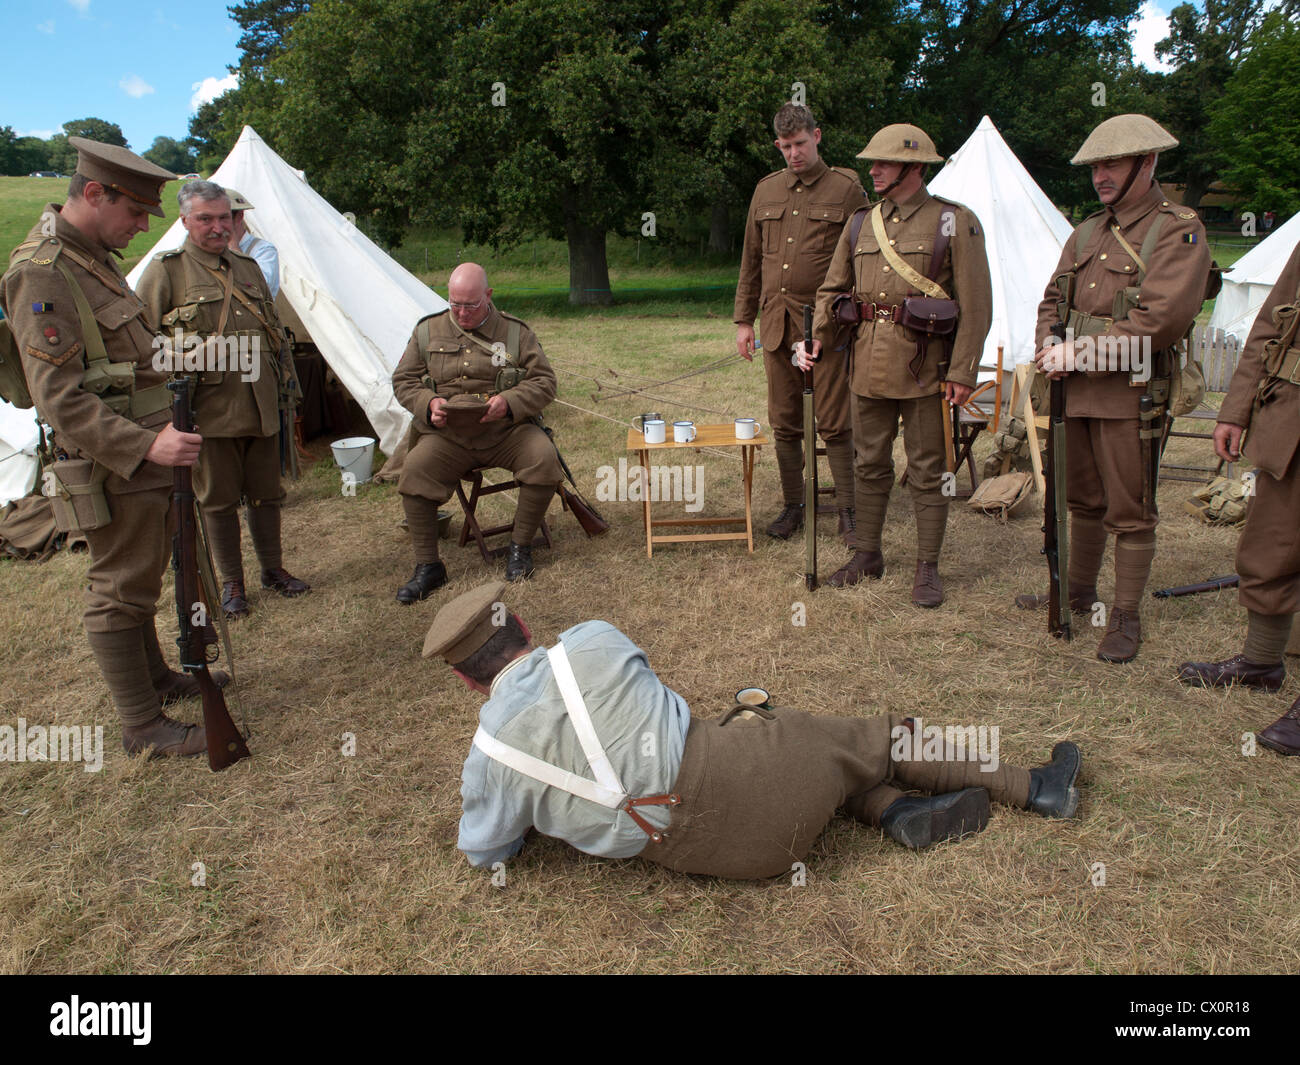 A scene from an historical enactment society's recreation of The First ...